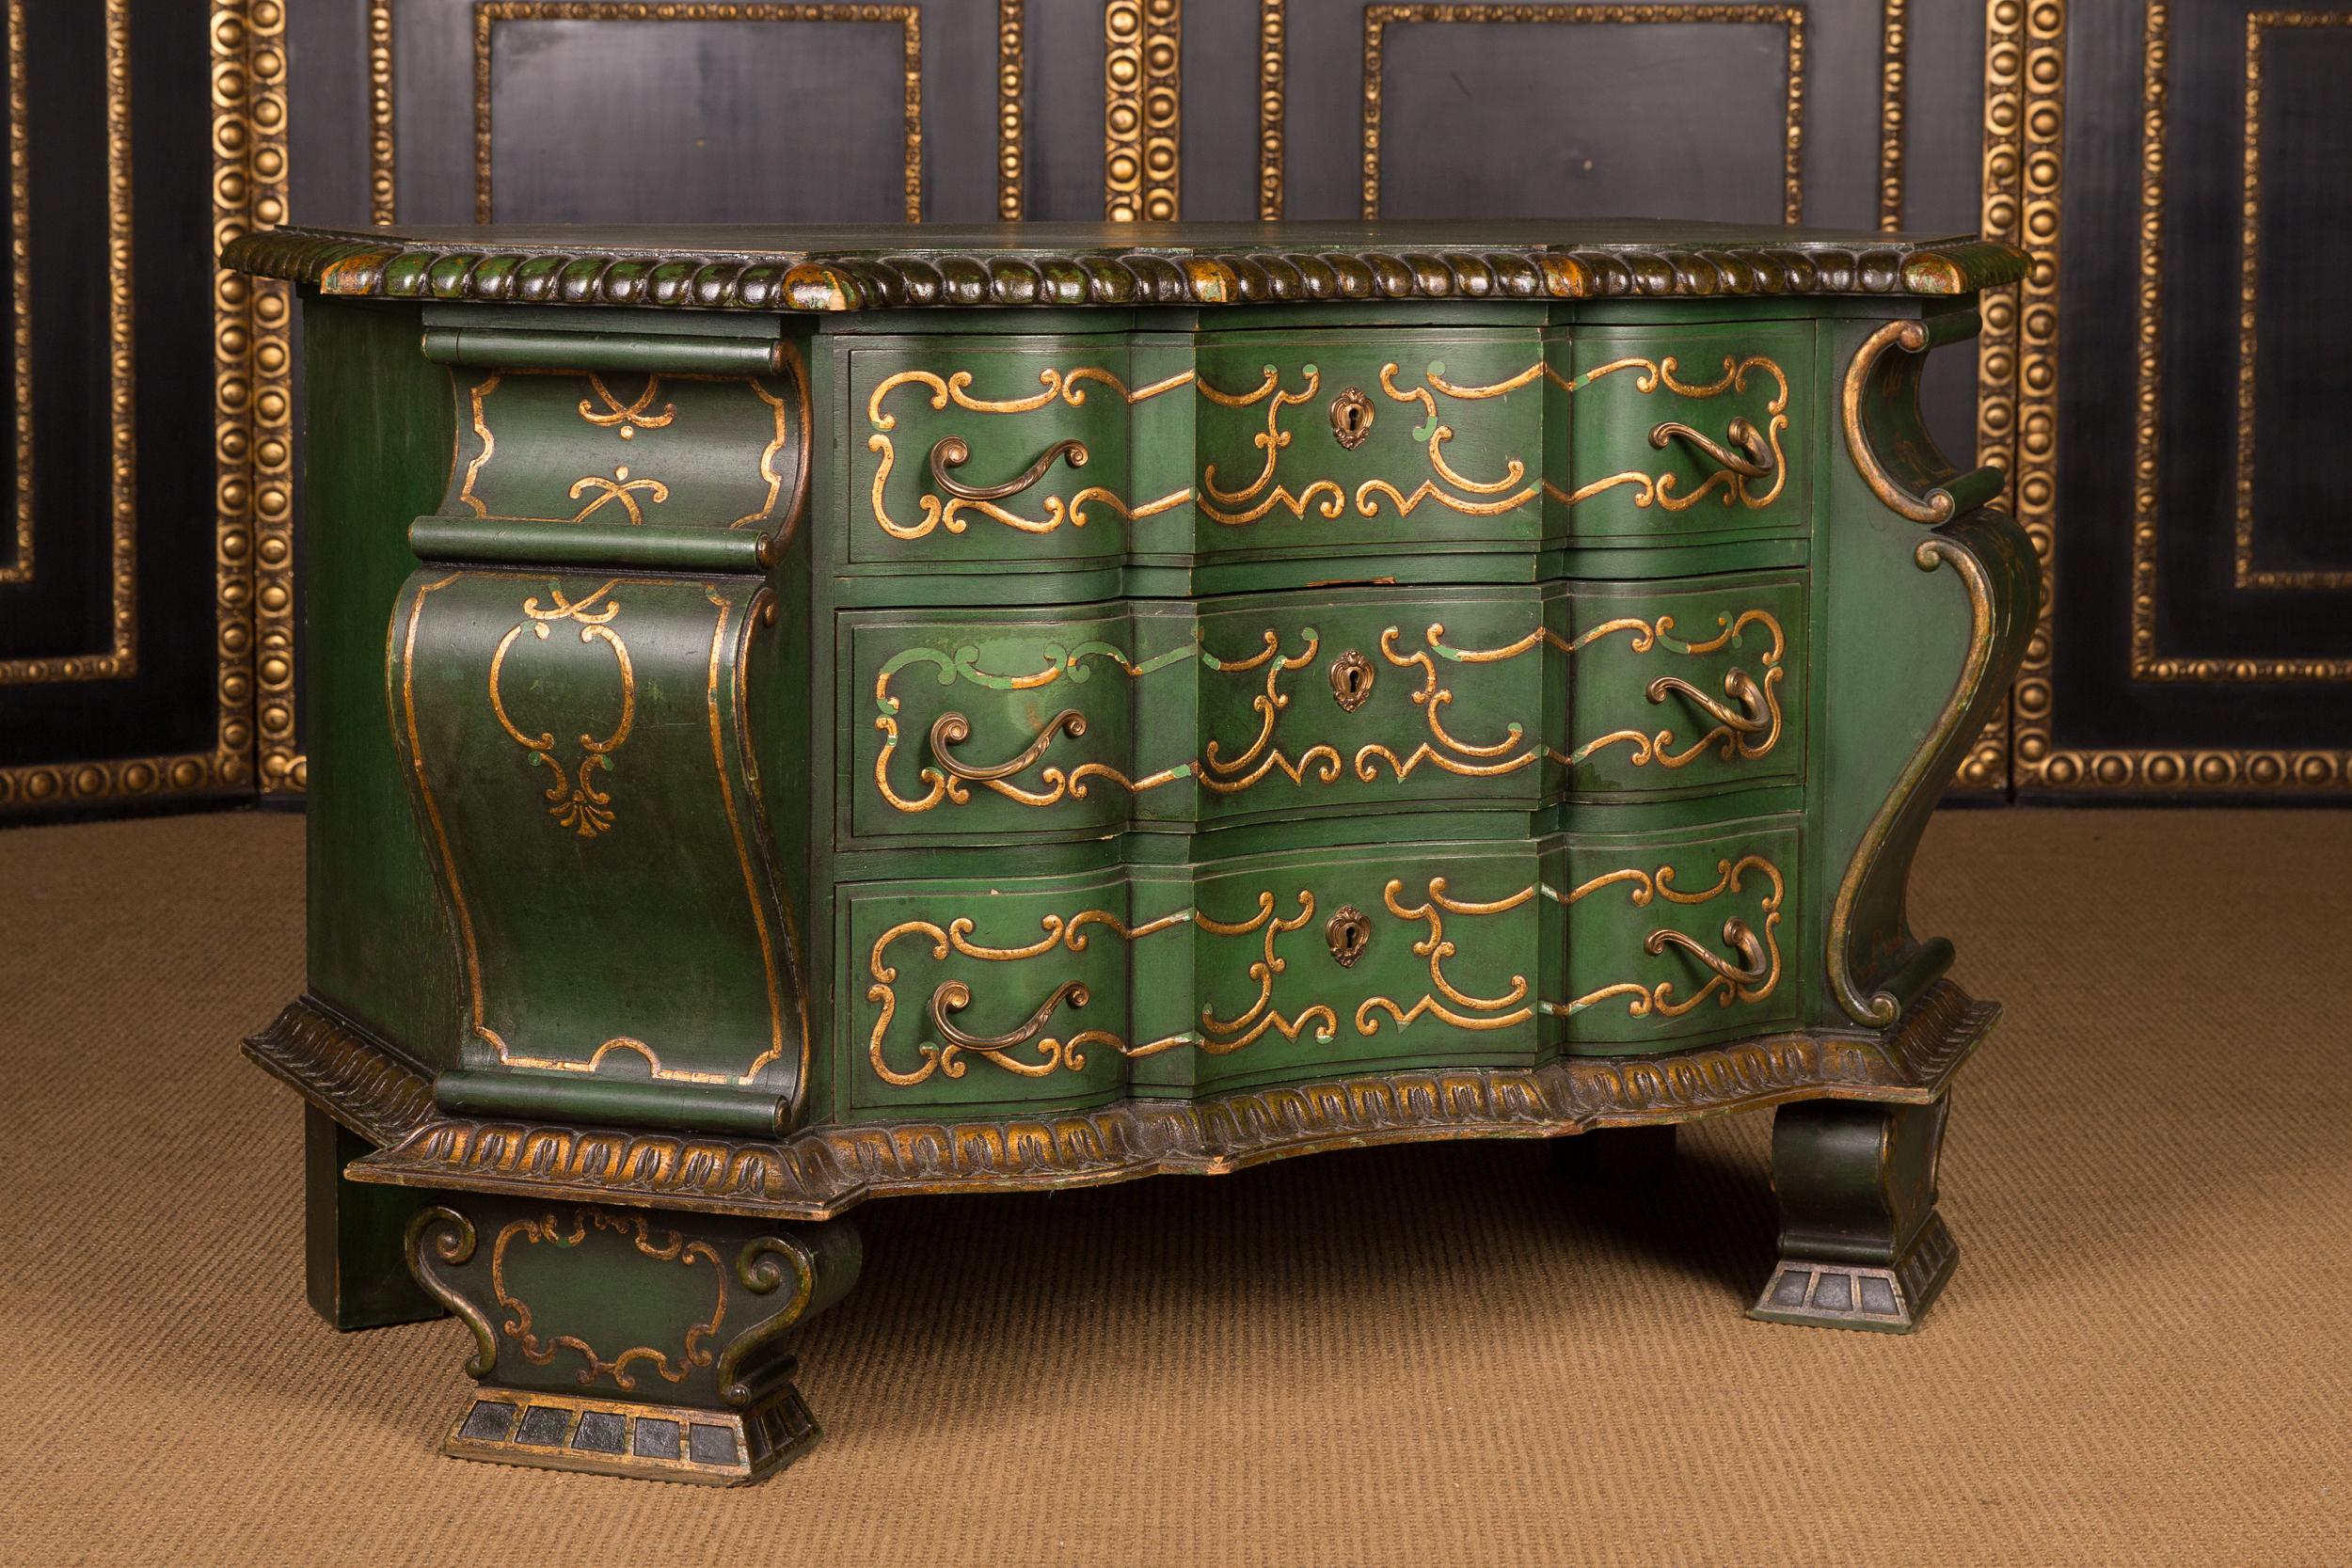 Solid wood painted in green. Profile-framed, reasonably curved frame on high, curved feet. In the multi-curved front three drawers with gold ornaments. Slightly protruding, properly curved, profile-framed cover plate.
Excellent, over decades grown